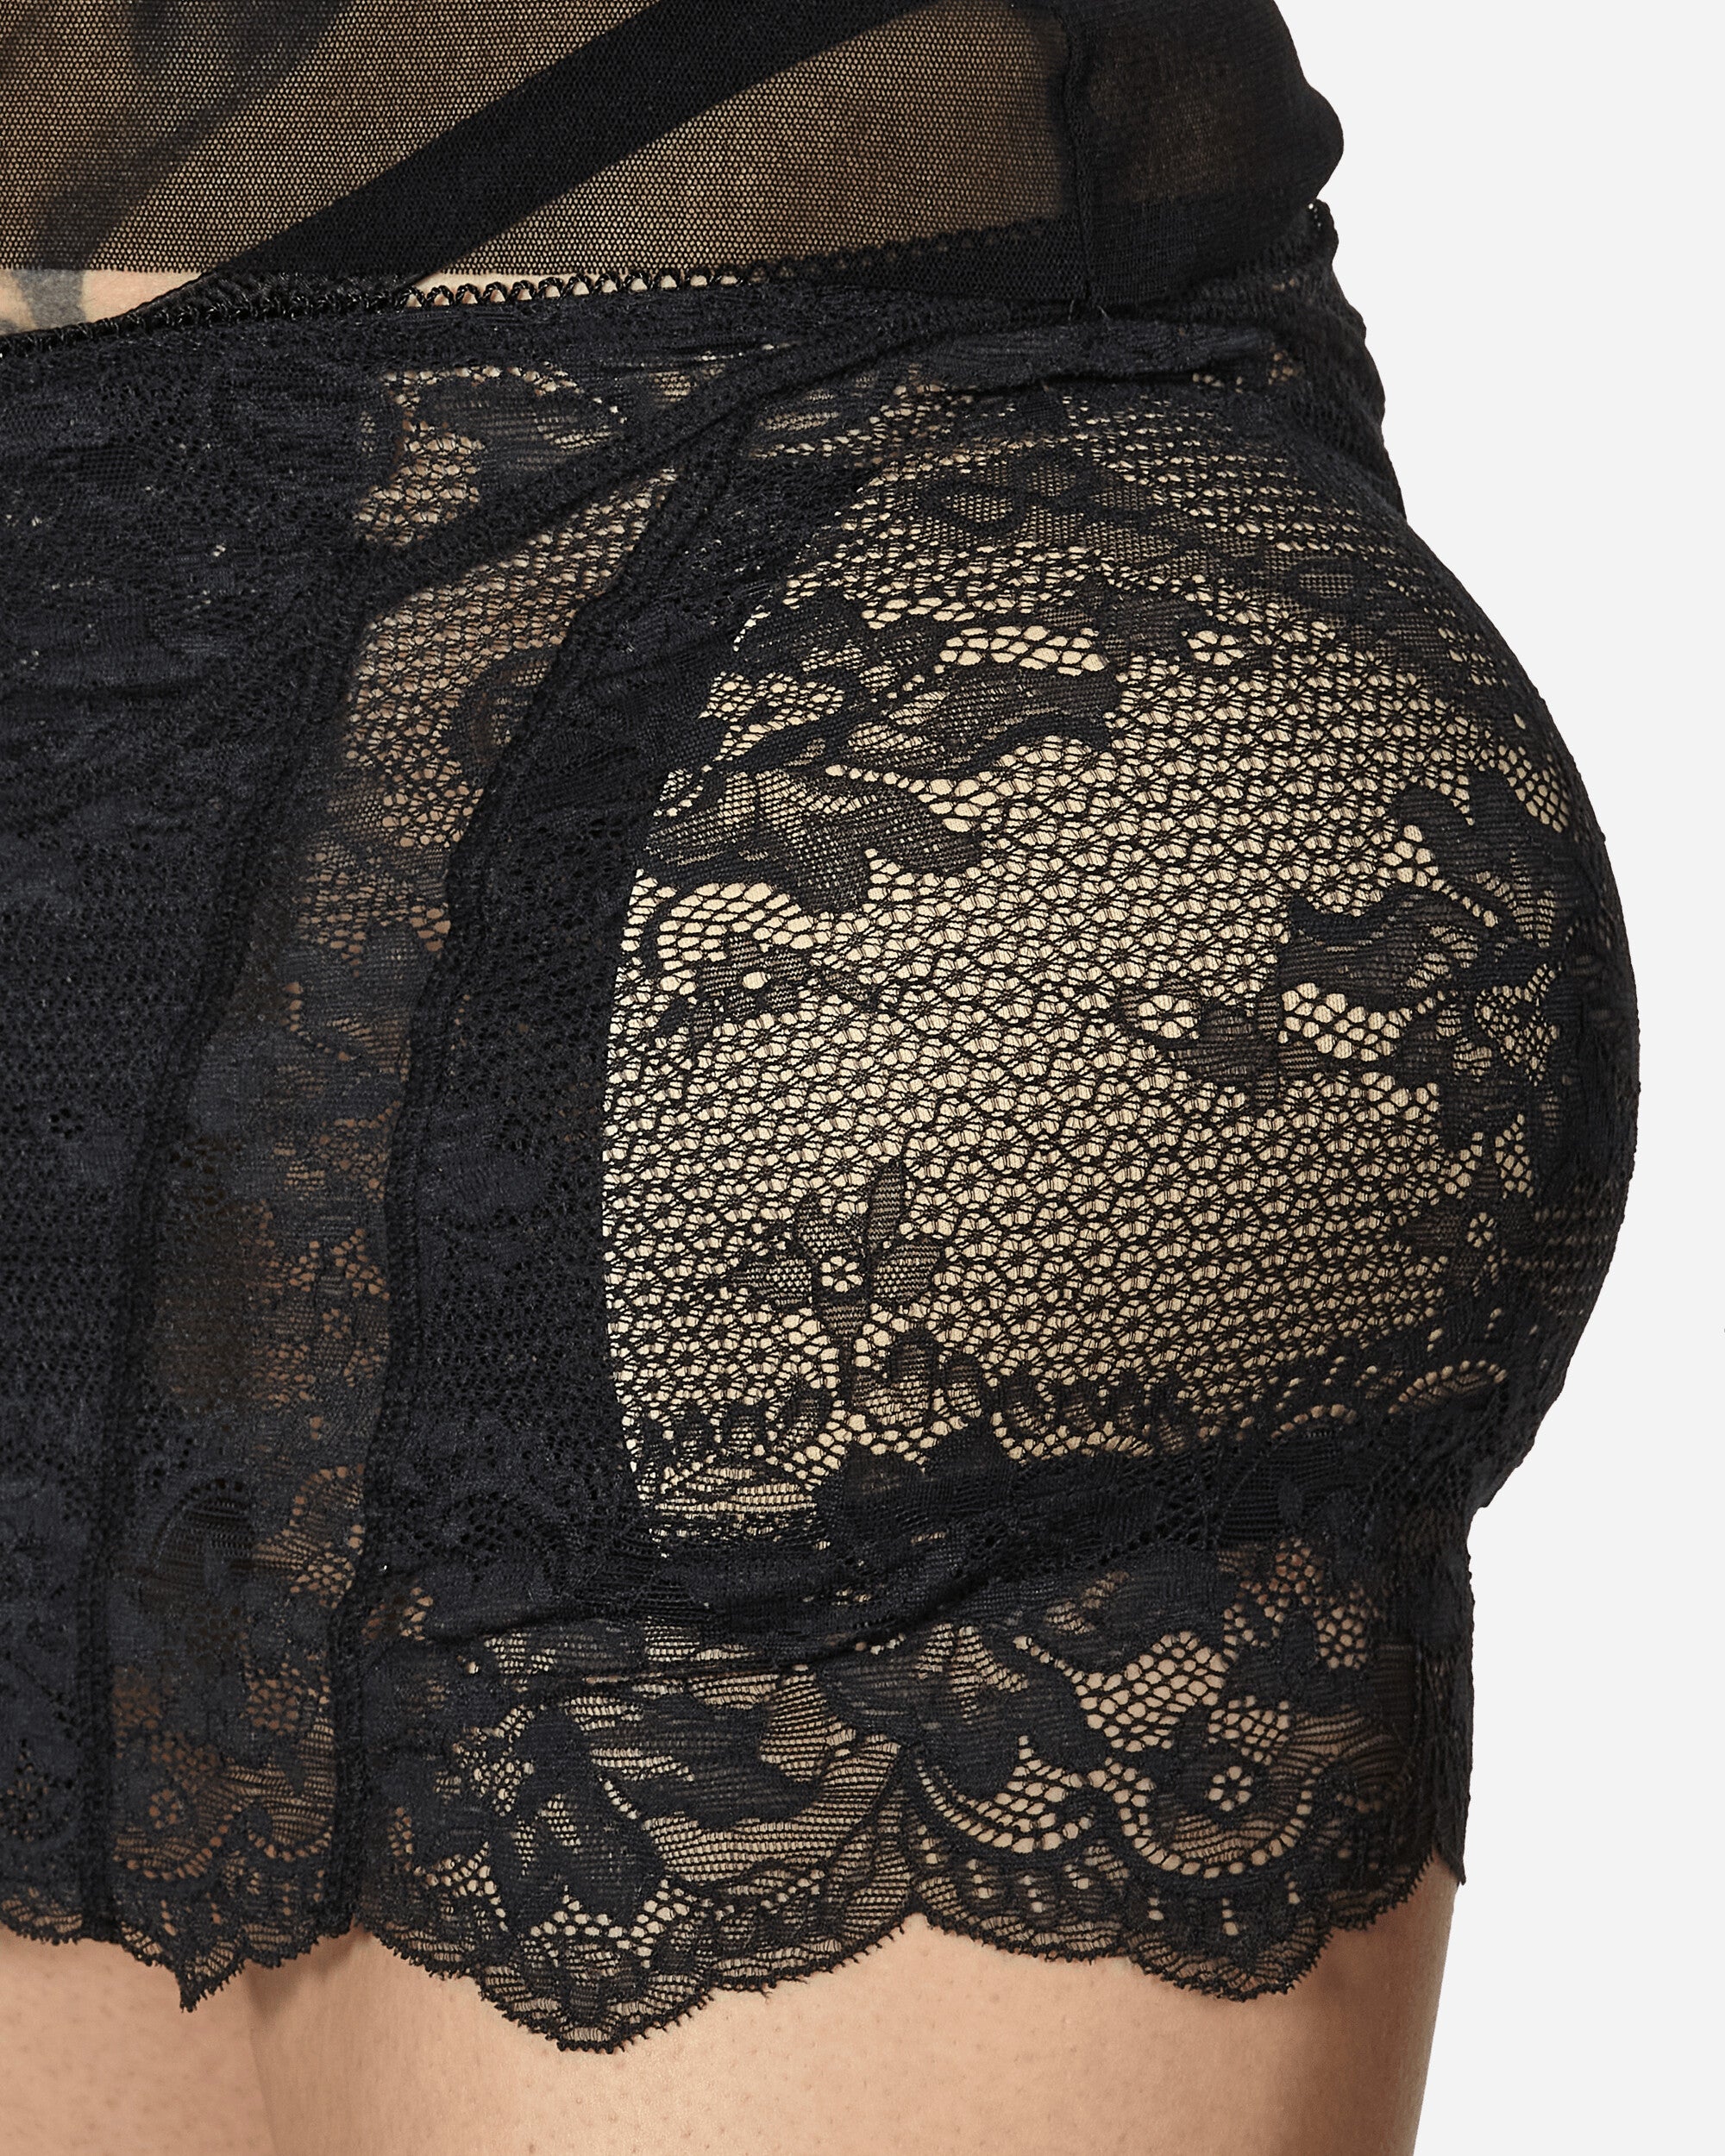 Jean Paul Gaultier Wmns Lace Skirt With Hips Padding Black Skirts Mini JU087-C047 00